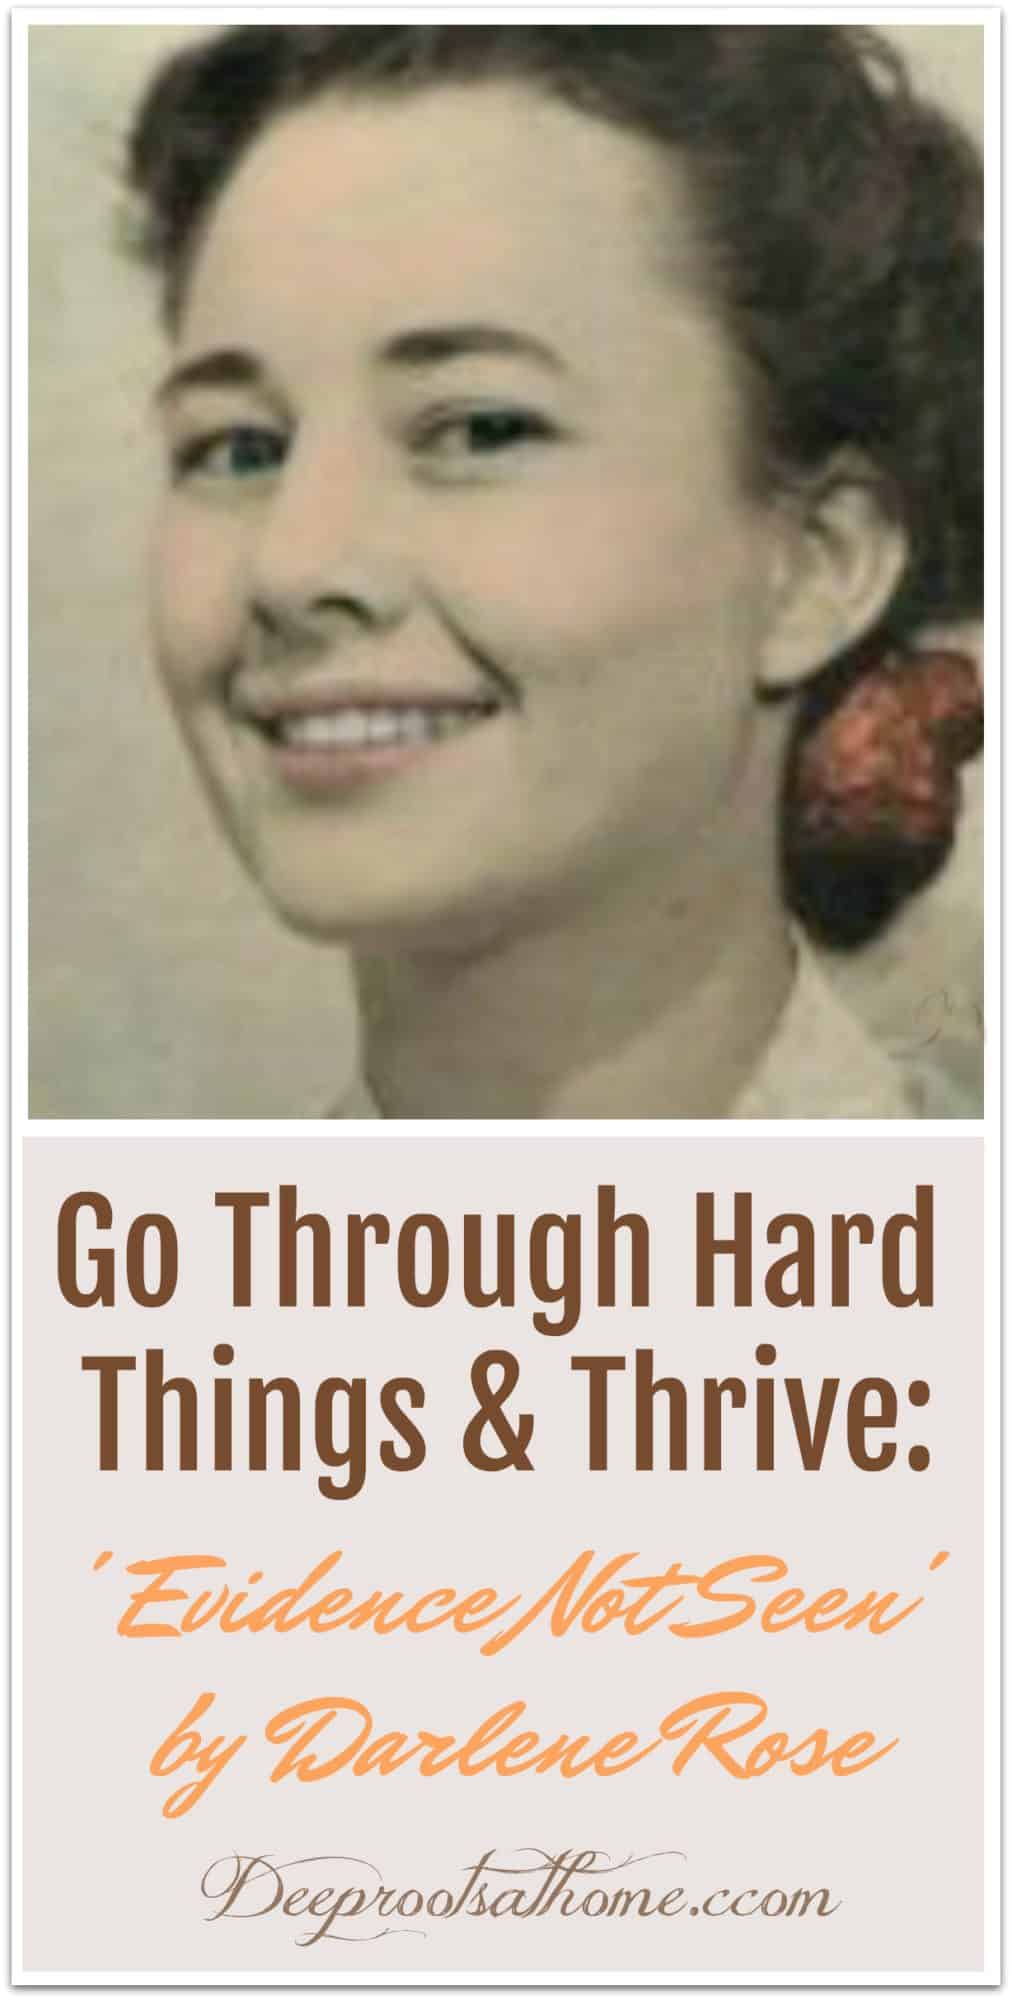 You Can Go Through Hard Places and Thrive: Evidence Not Seen by Darlene Rose, Darlene Diebler Rose.